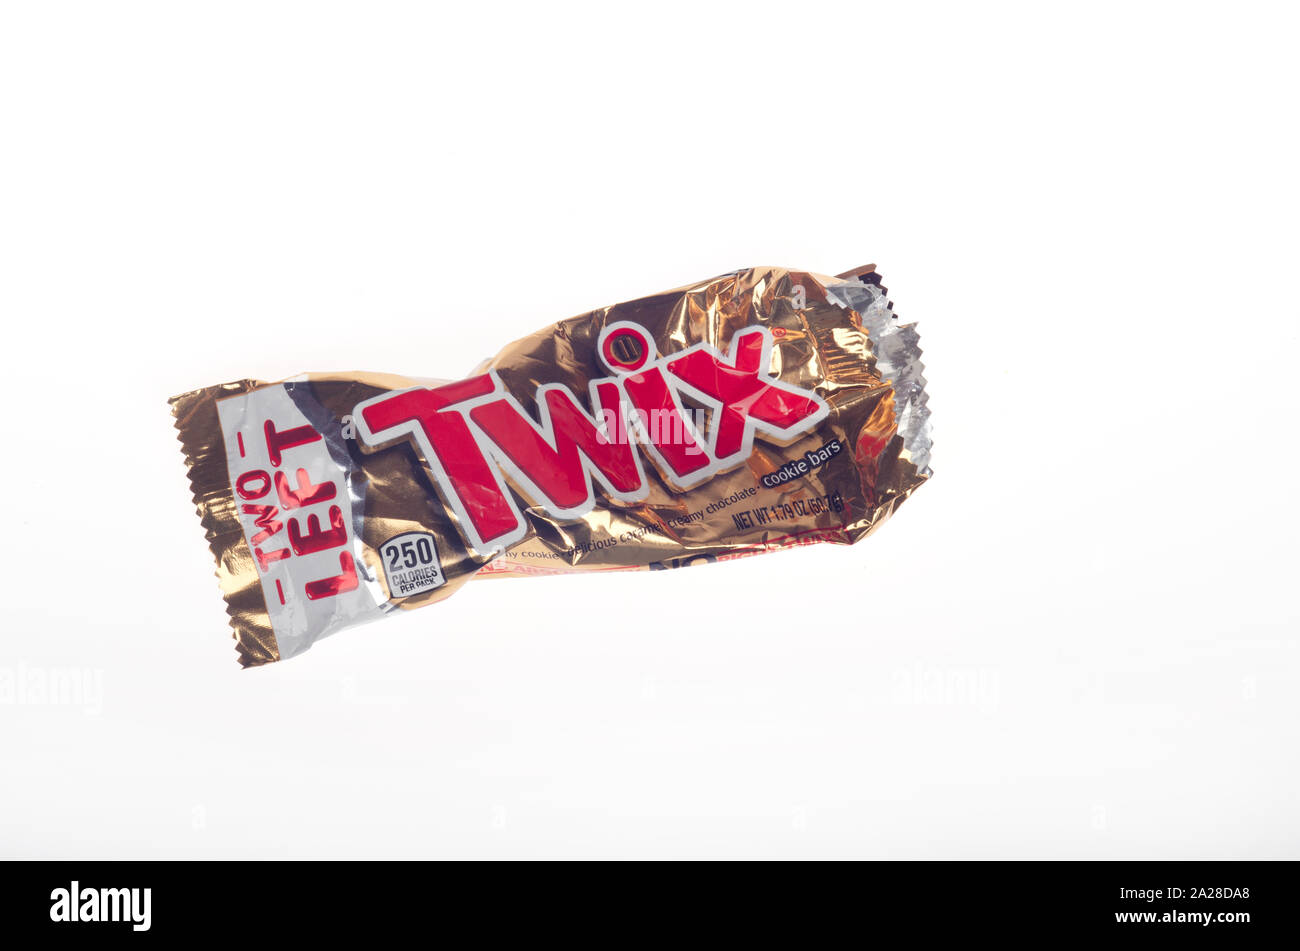 Empty crushed Twix candy bar wrapper on white Stock Photo